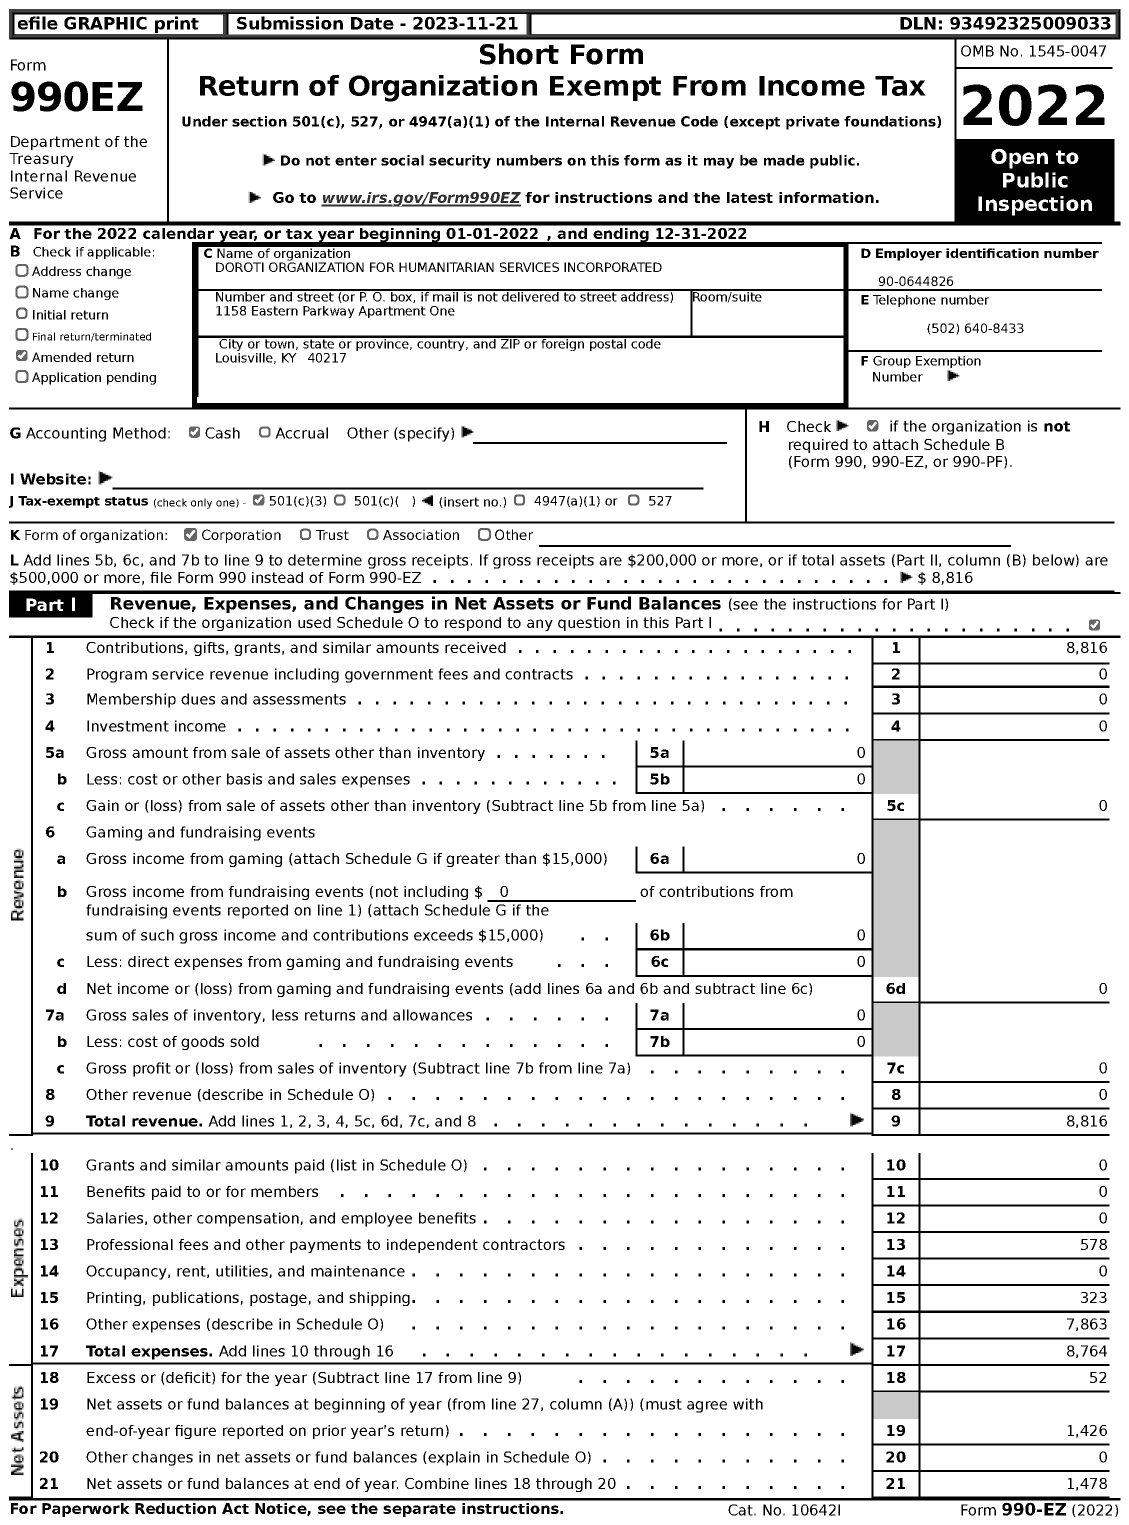 Image of first page of 2022 Form 990EZ for Doroti Organization for Humanitarian Services Incorporated